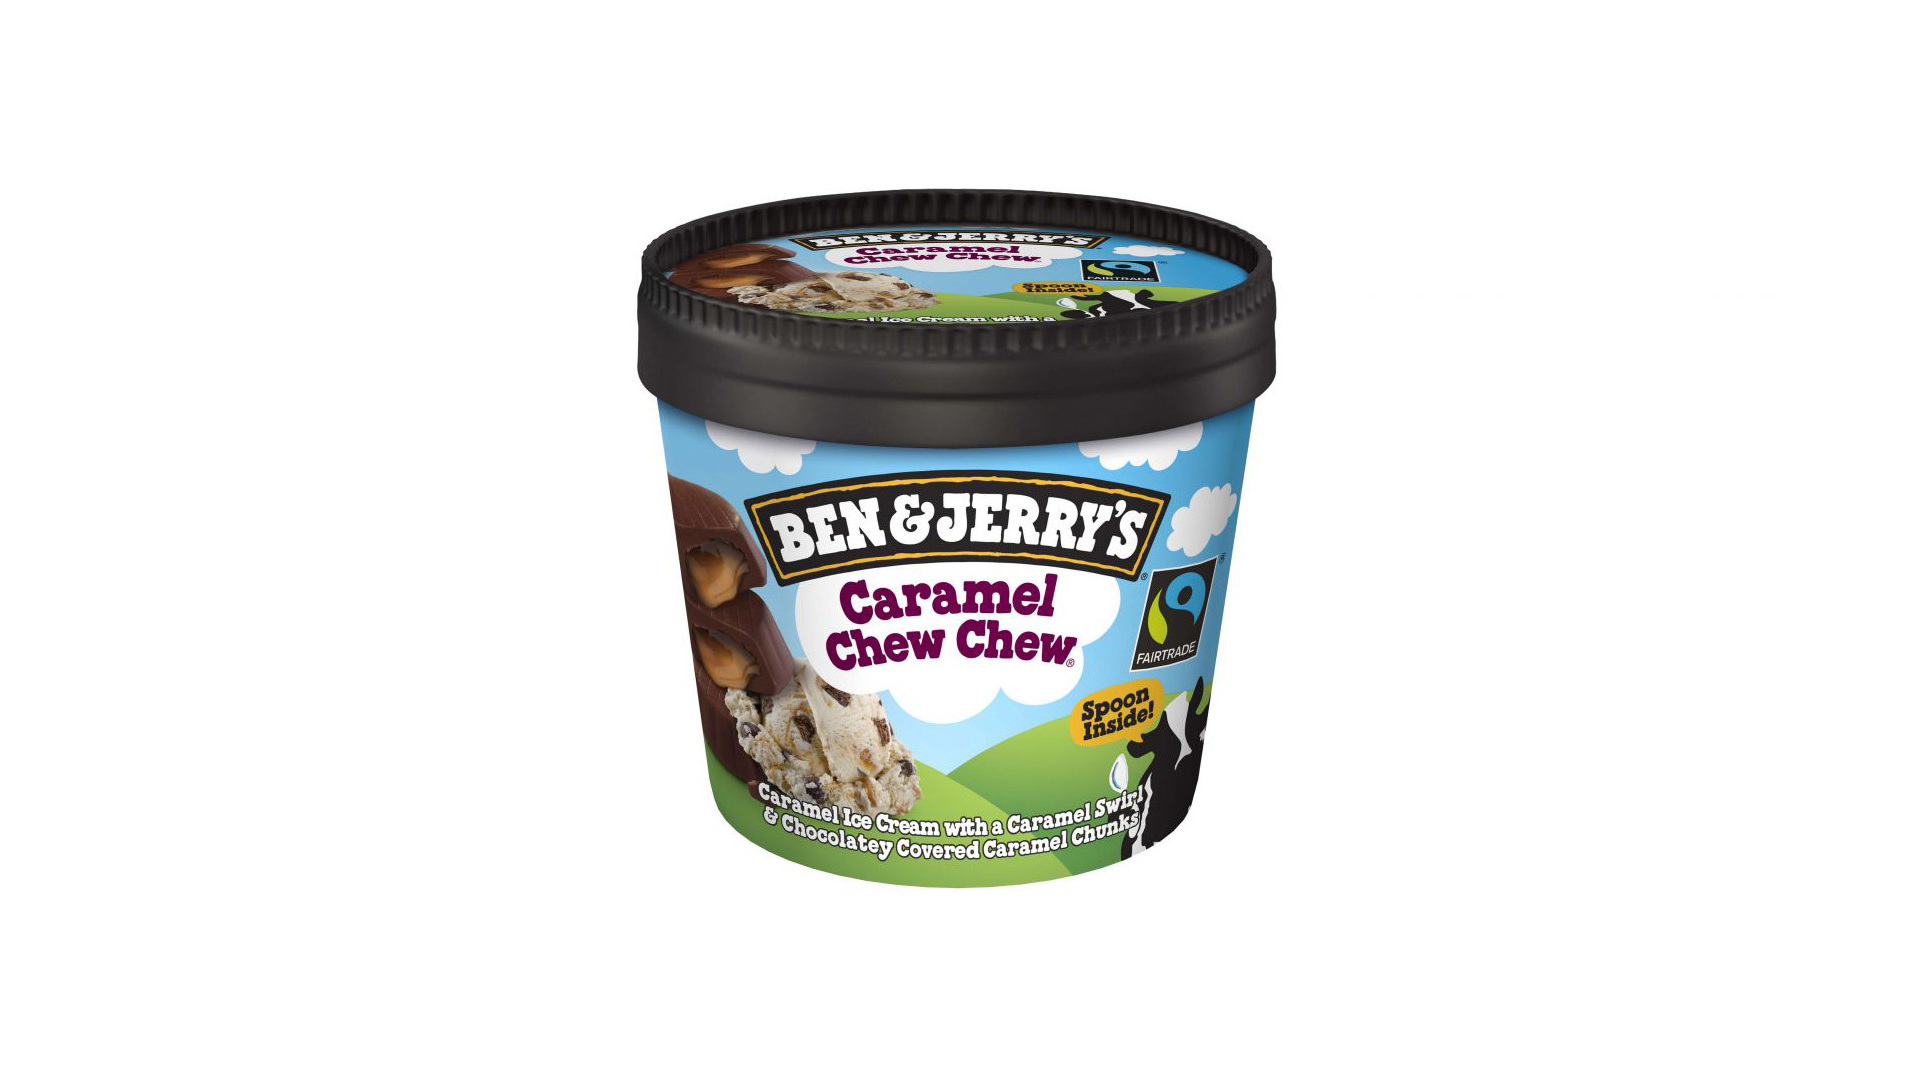 Ben & Jerry's Caramel Chew Chew 100ml - Burger Delivery in South Woodford E18